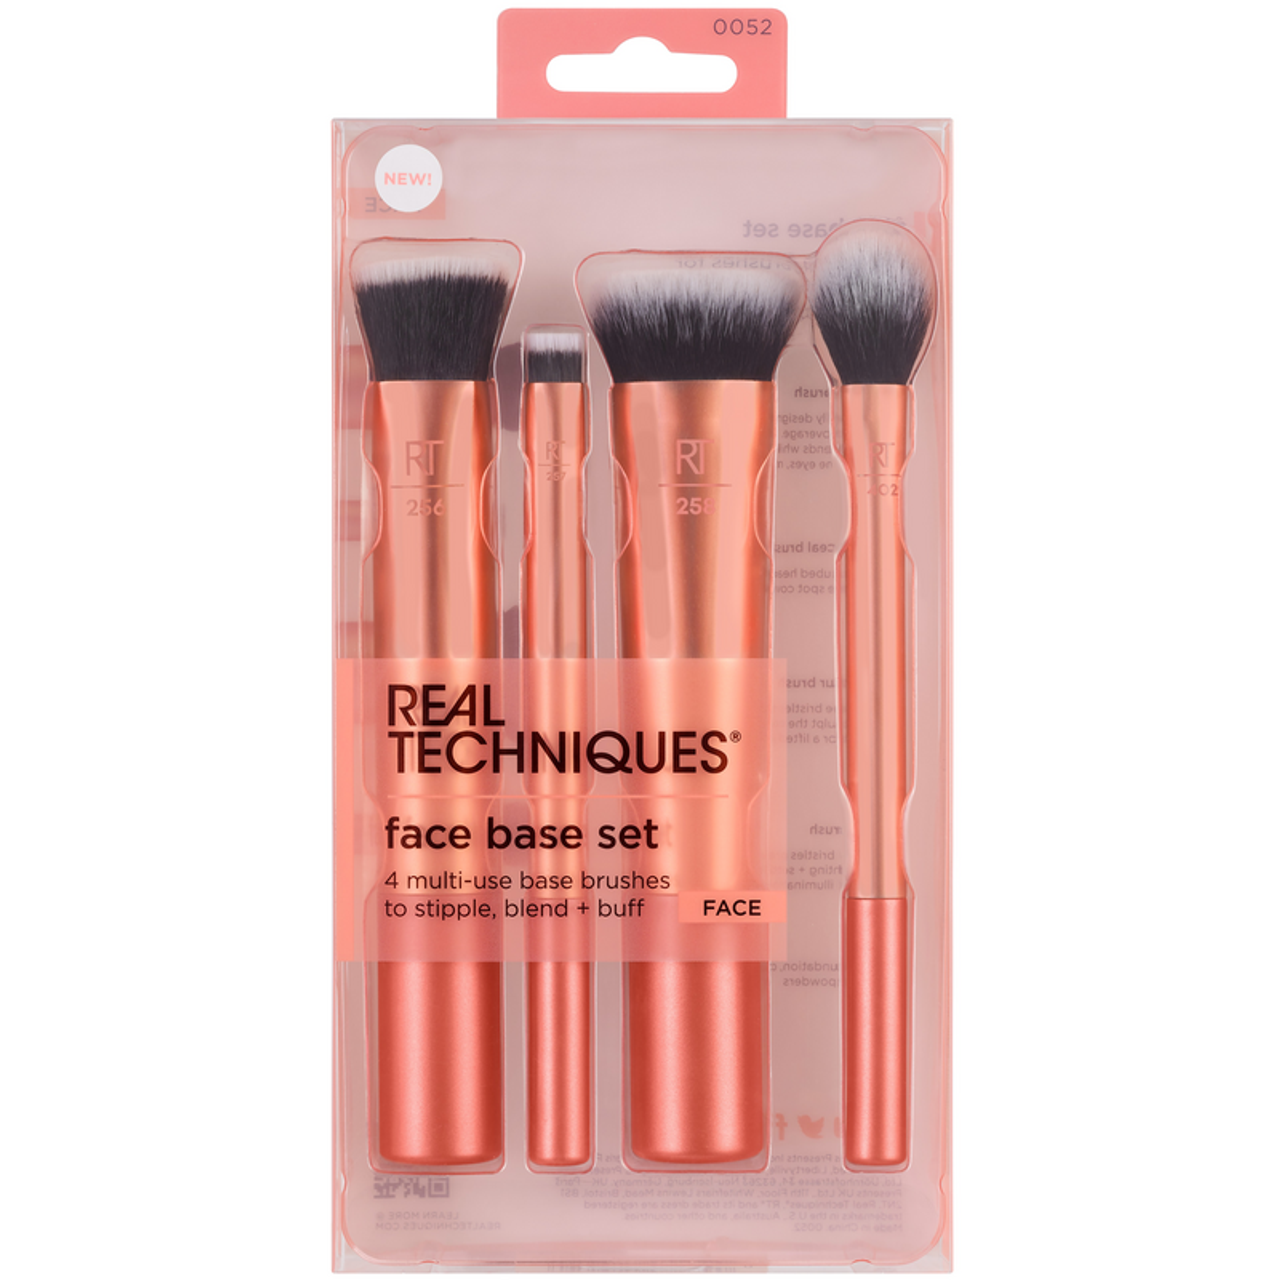 REAL TECHNIQUES FACE BASE SET 4 MULTI USE BRUSH 4 PENNELLI MAKE UP